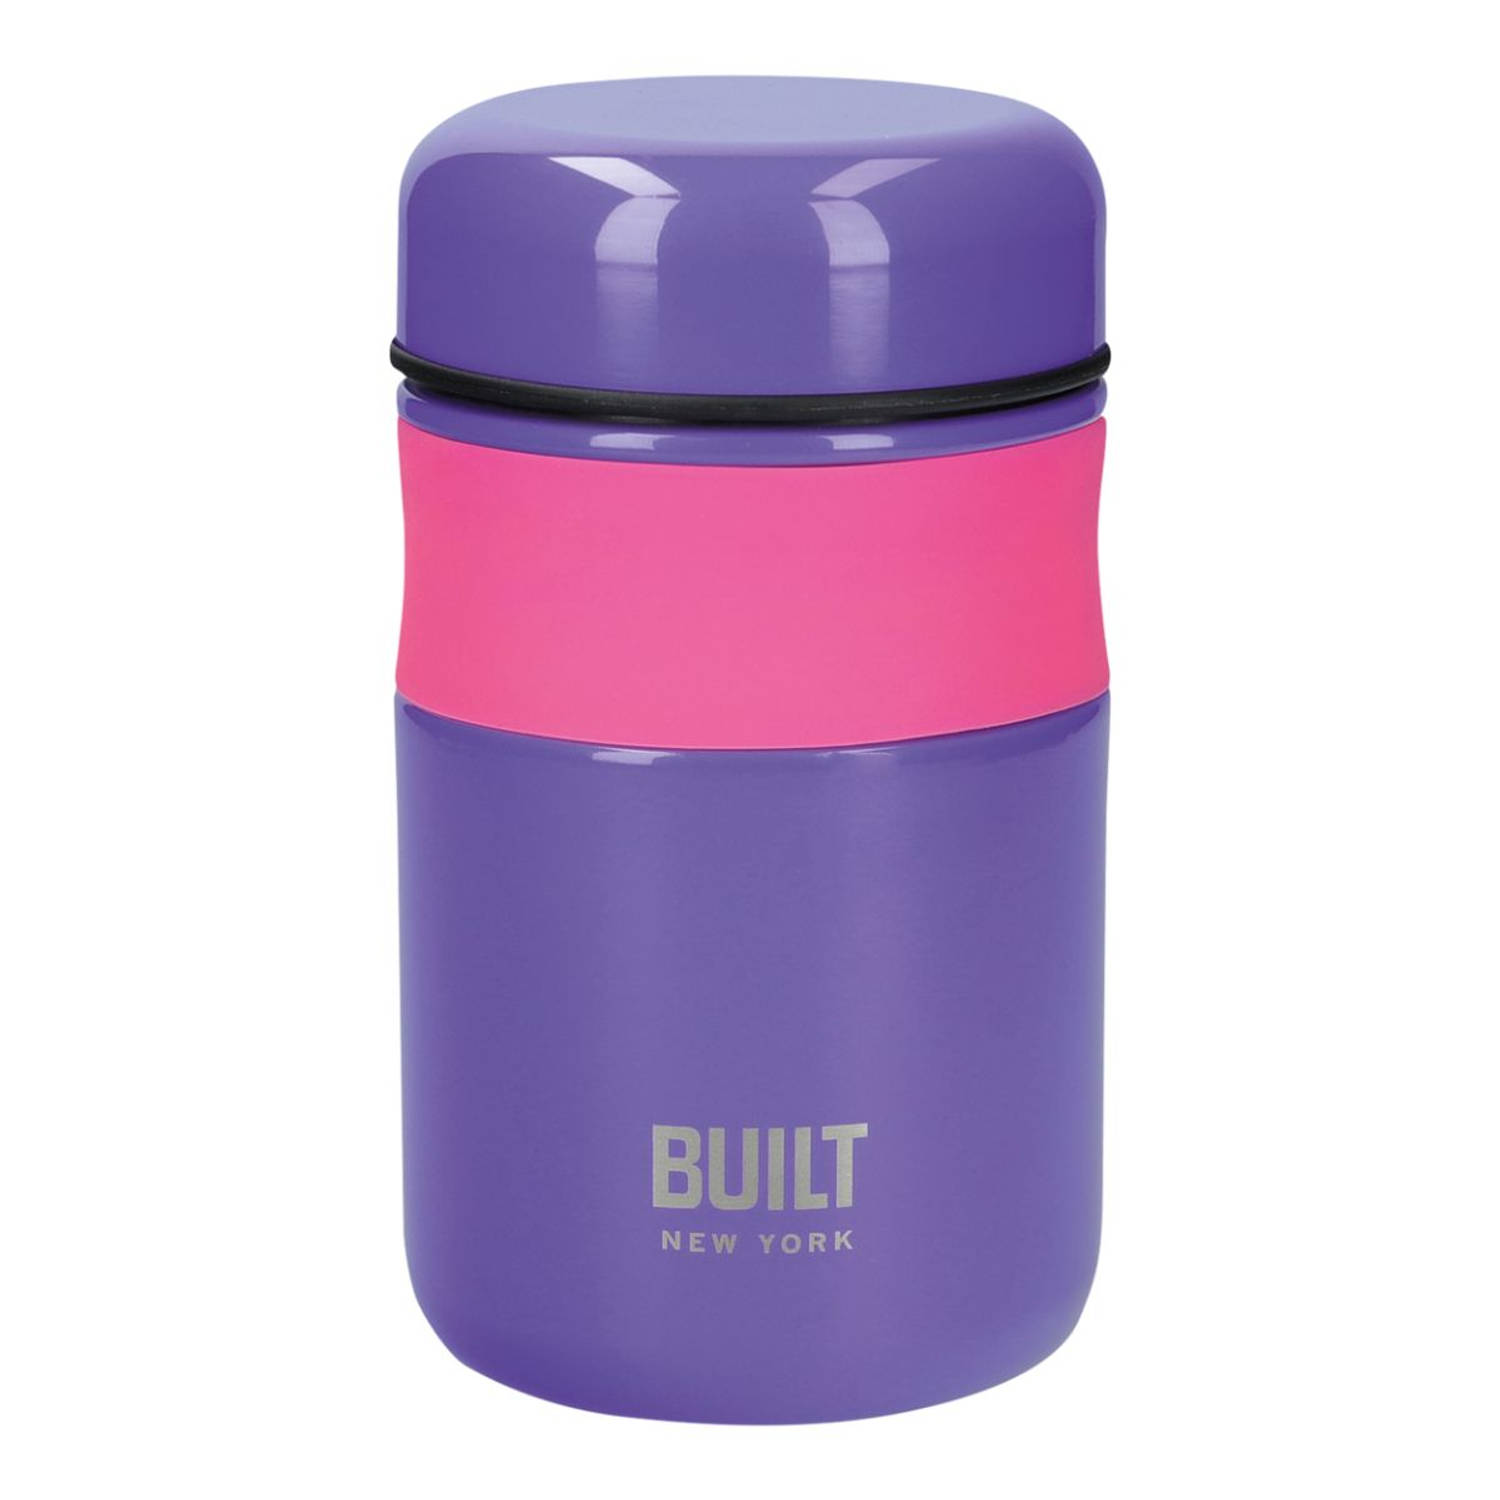 BUILT New York - Thermos Lunchbox, 0.49 L, Paars - BUILT New York Active